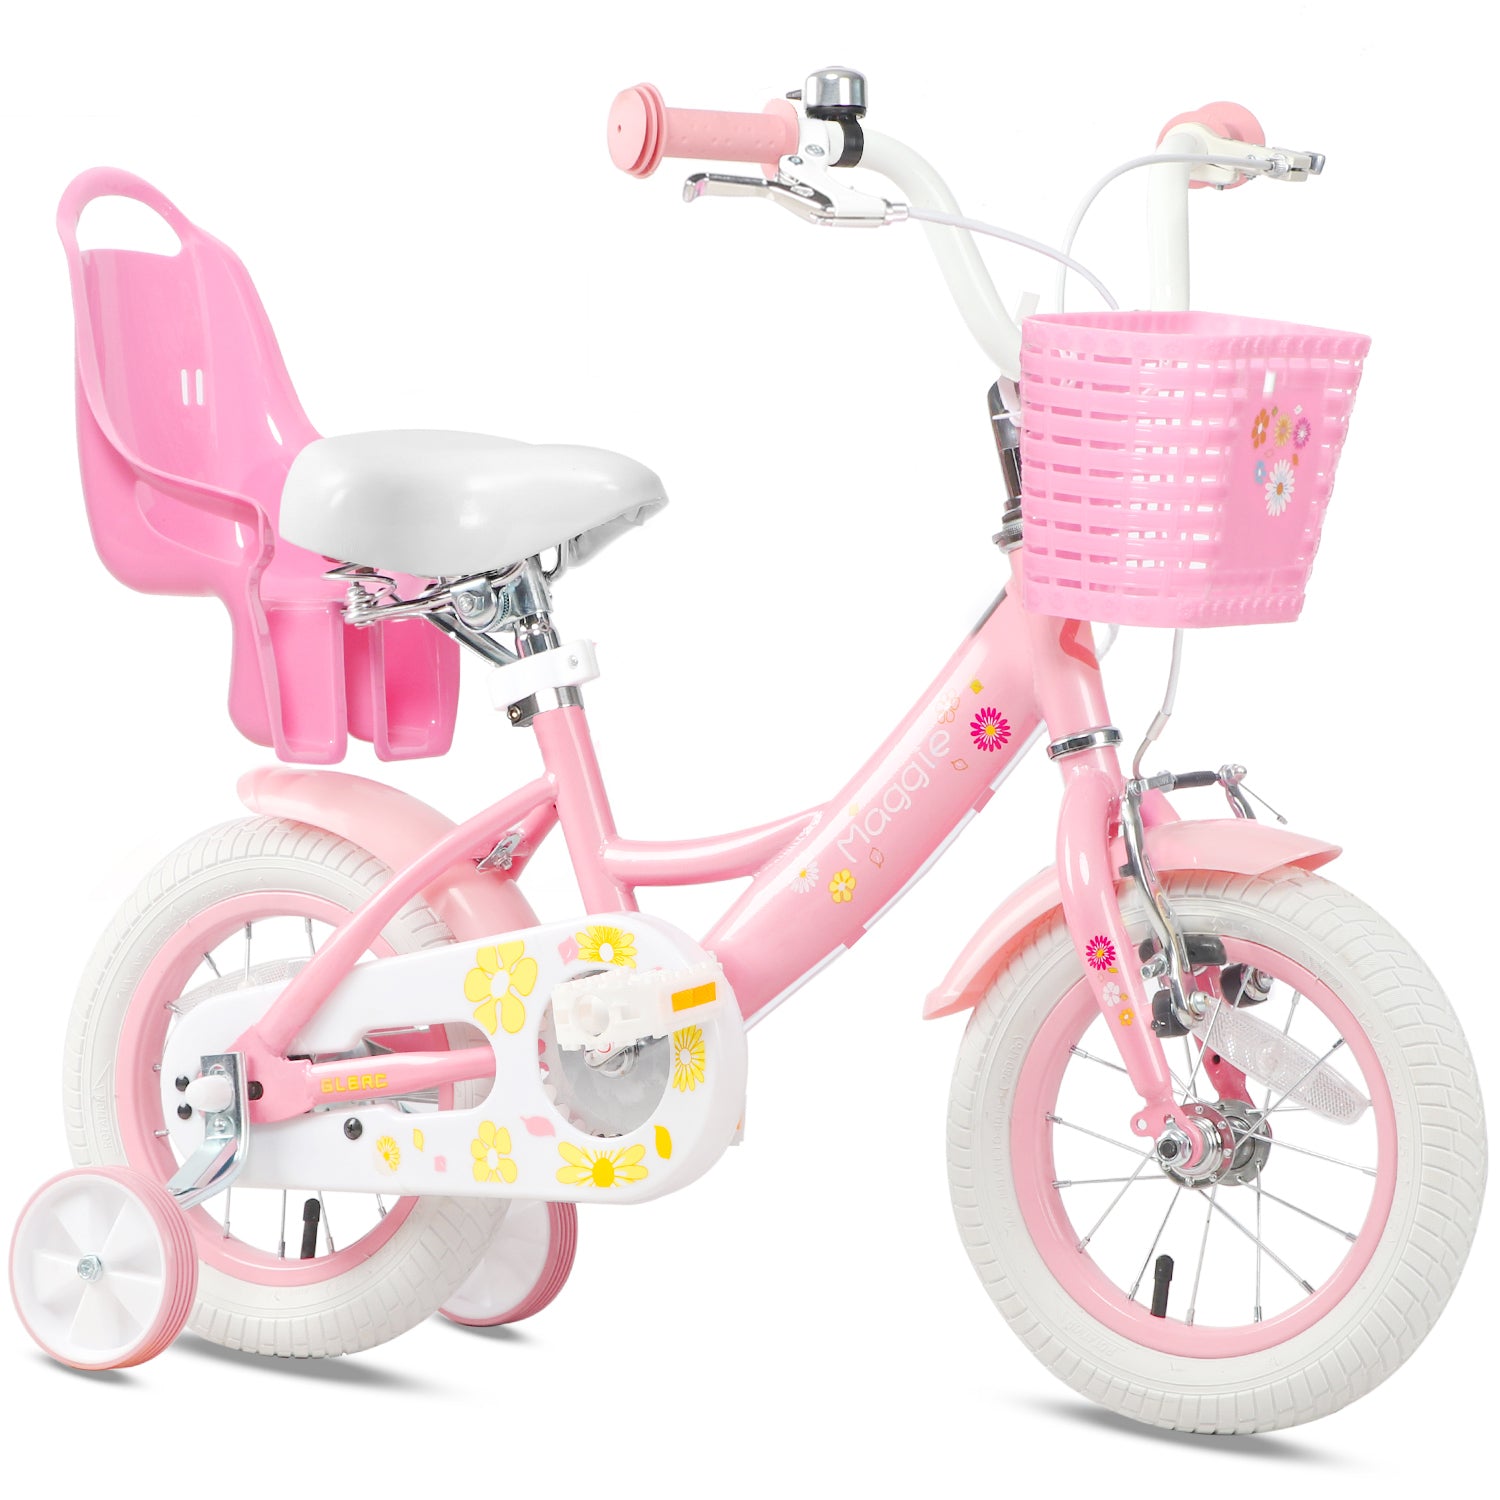 Glerc Girls Bike: Lightweight Childrens Bicycle for Ages 2-6